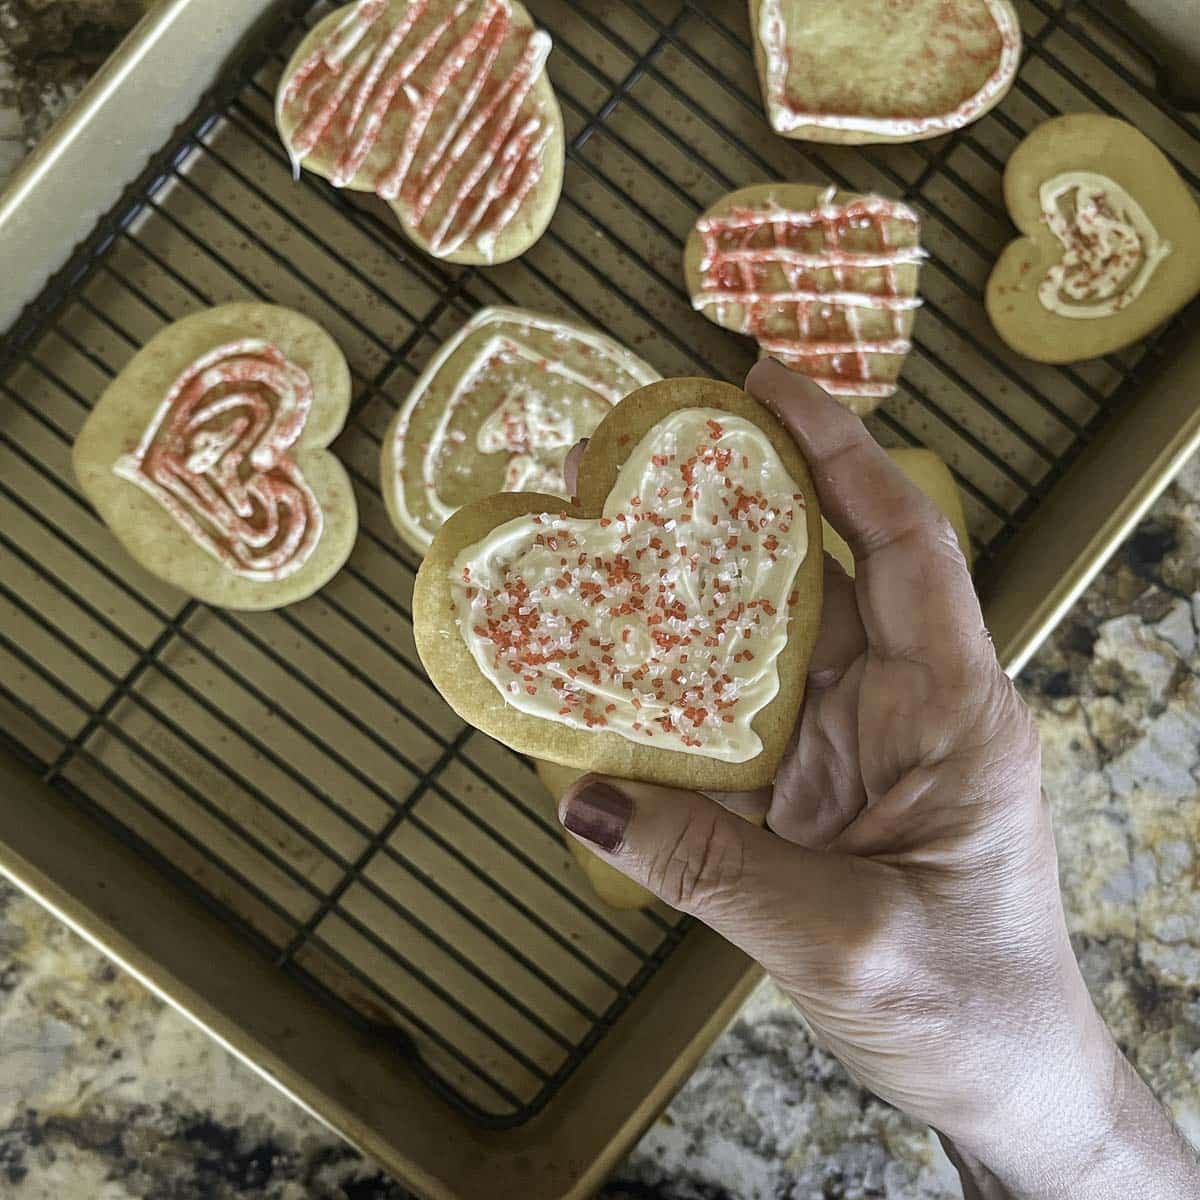 a heart shaped cookies being held over a tray of more cookies